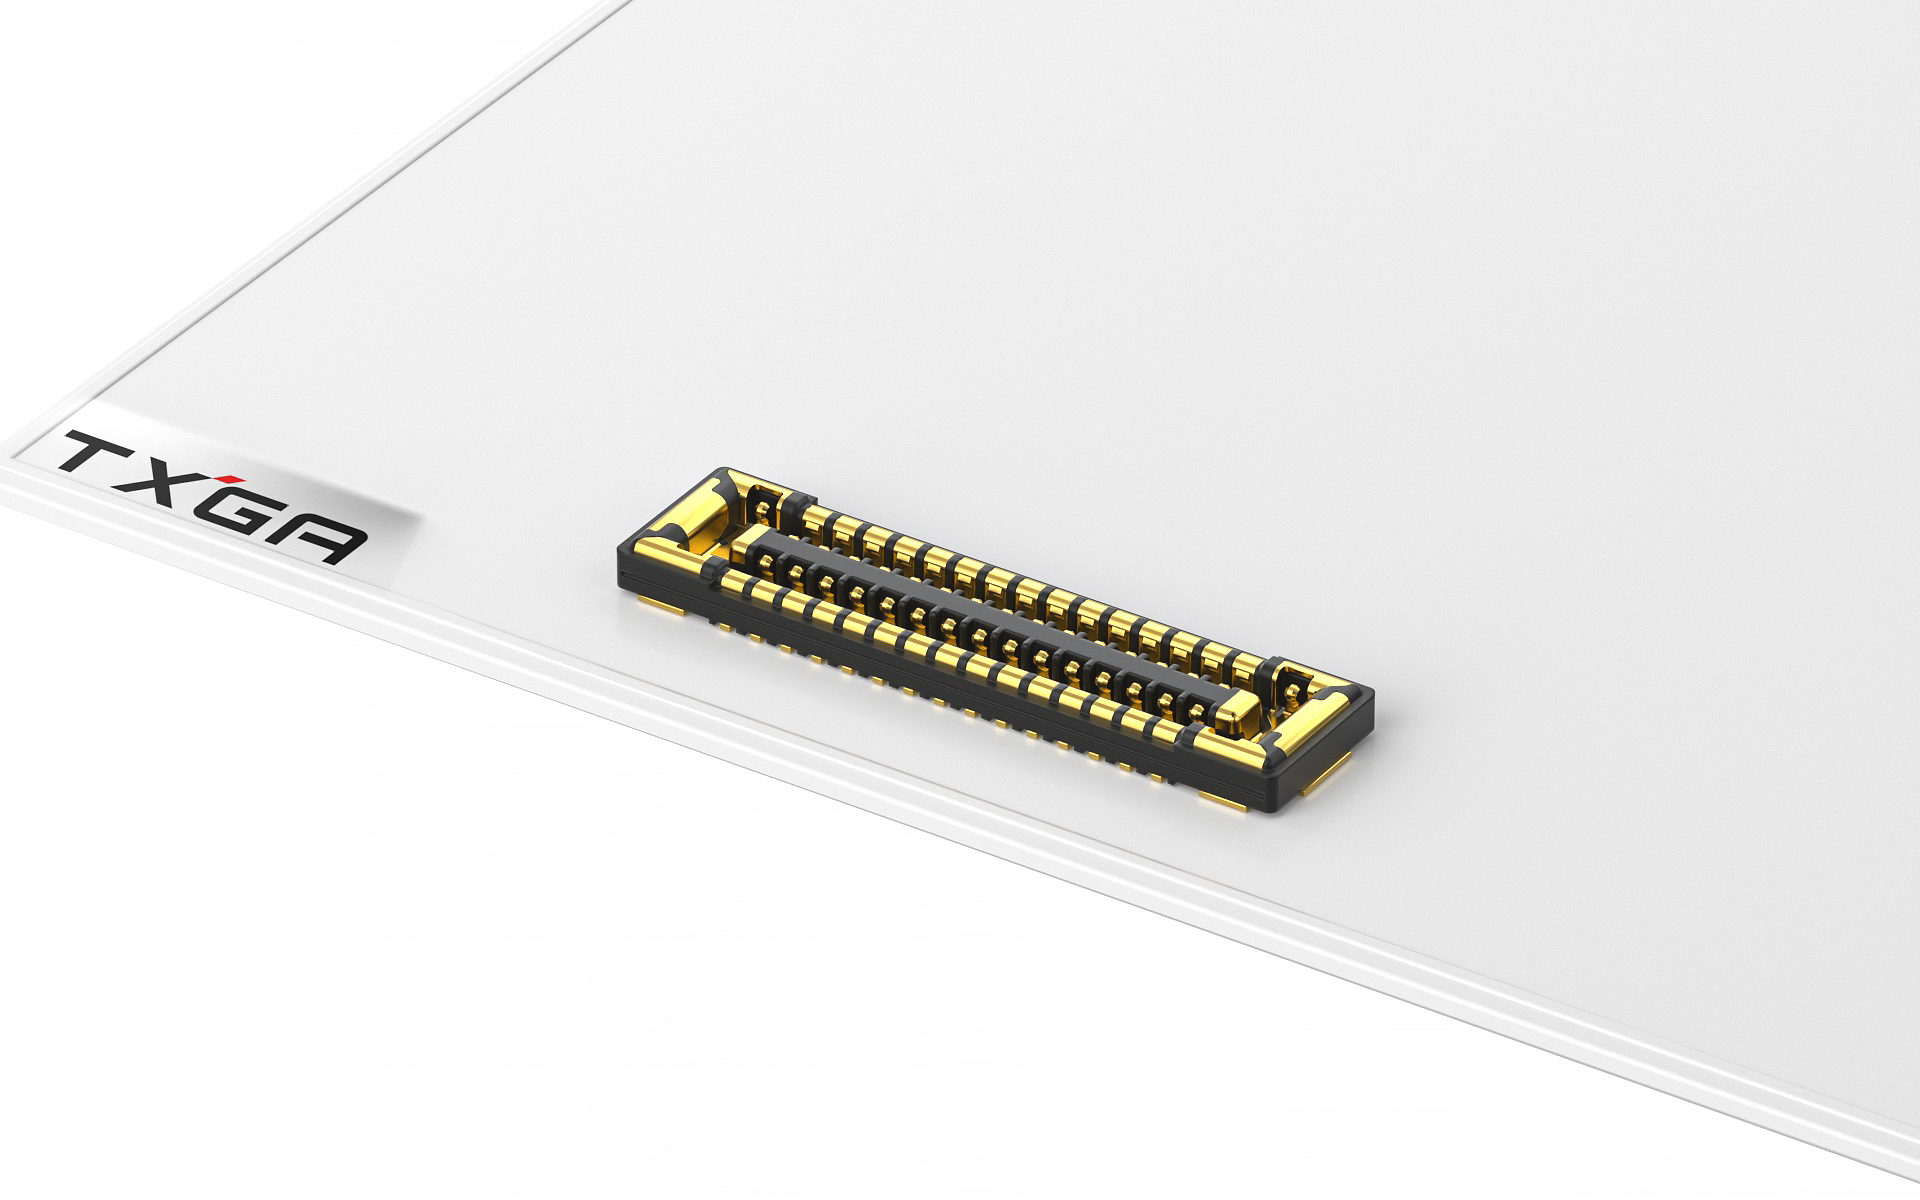 Board to Board Connector,0.35mm,Female,40Circuits,Vertical(180°),SMT, (Mated height 0.6mm)